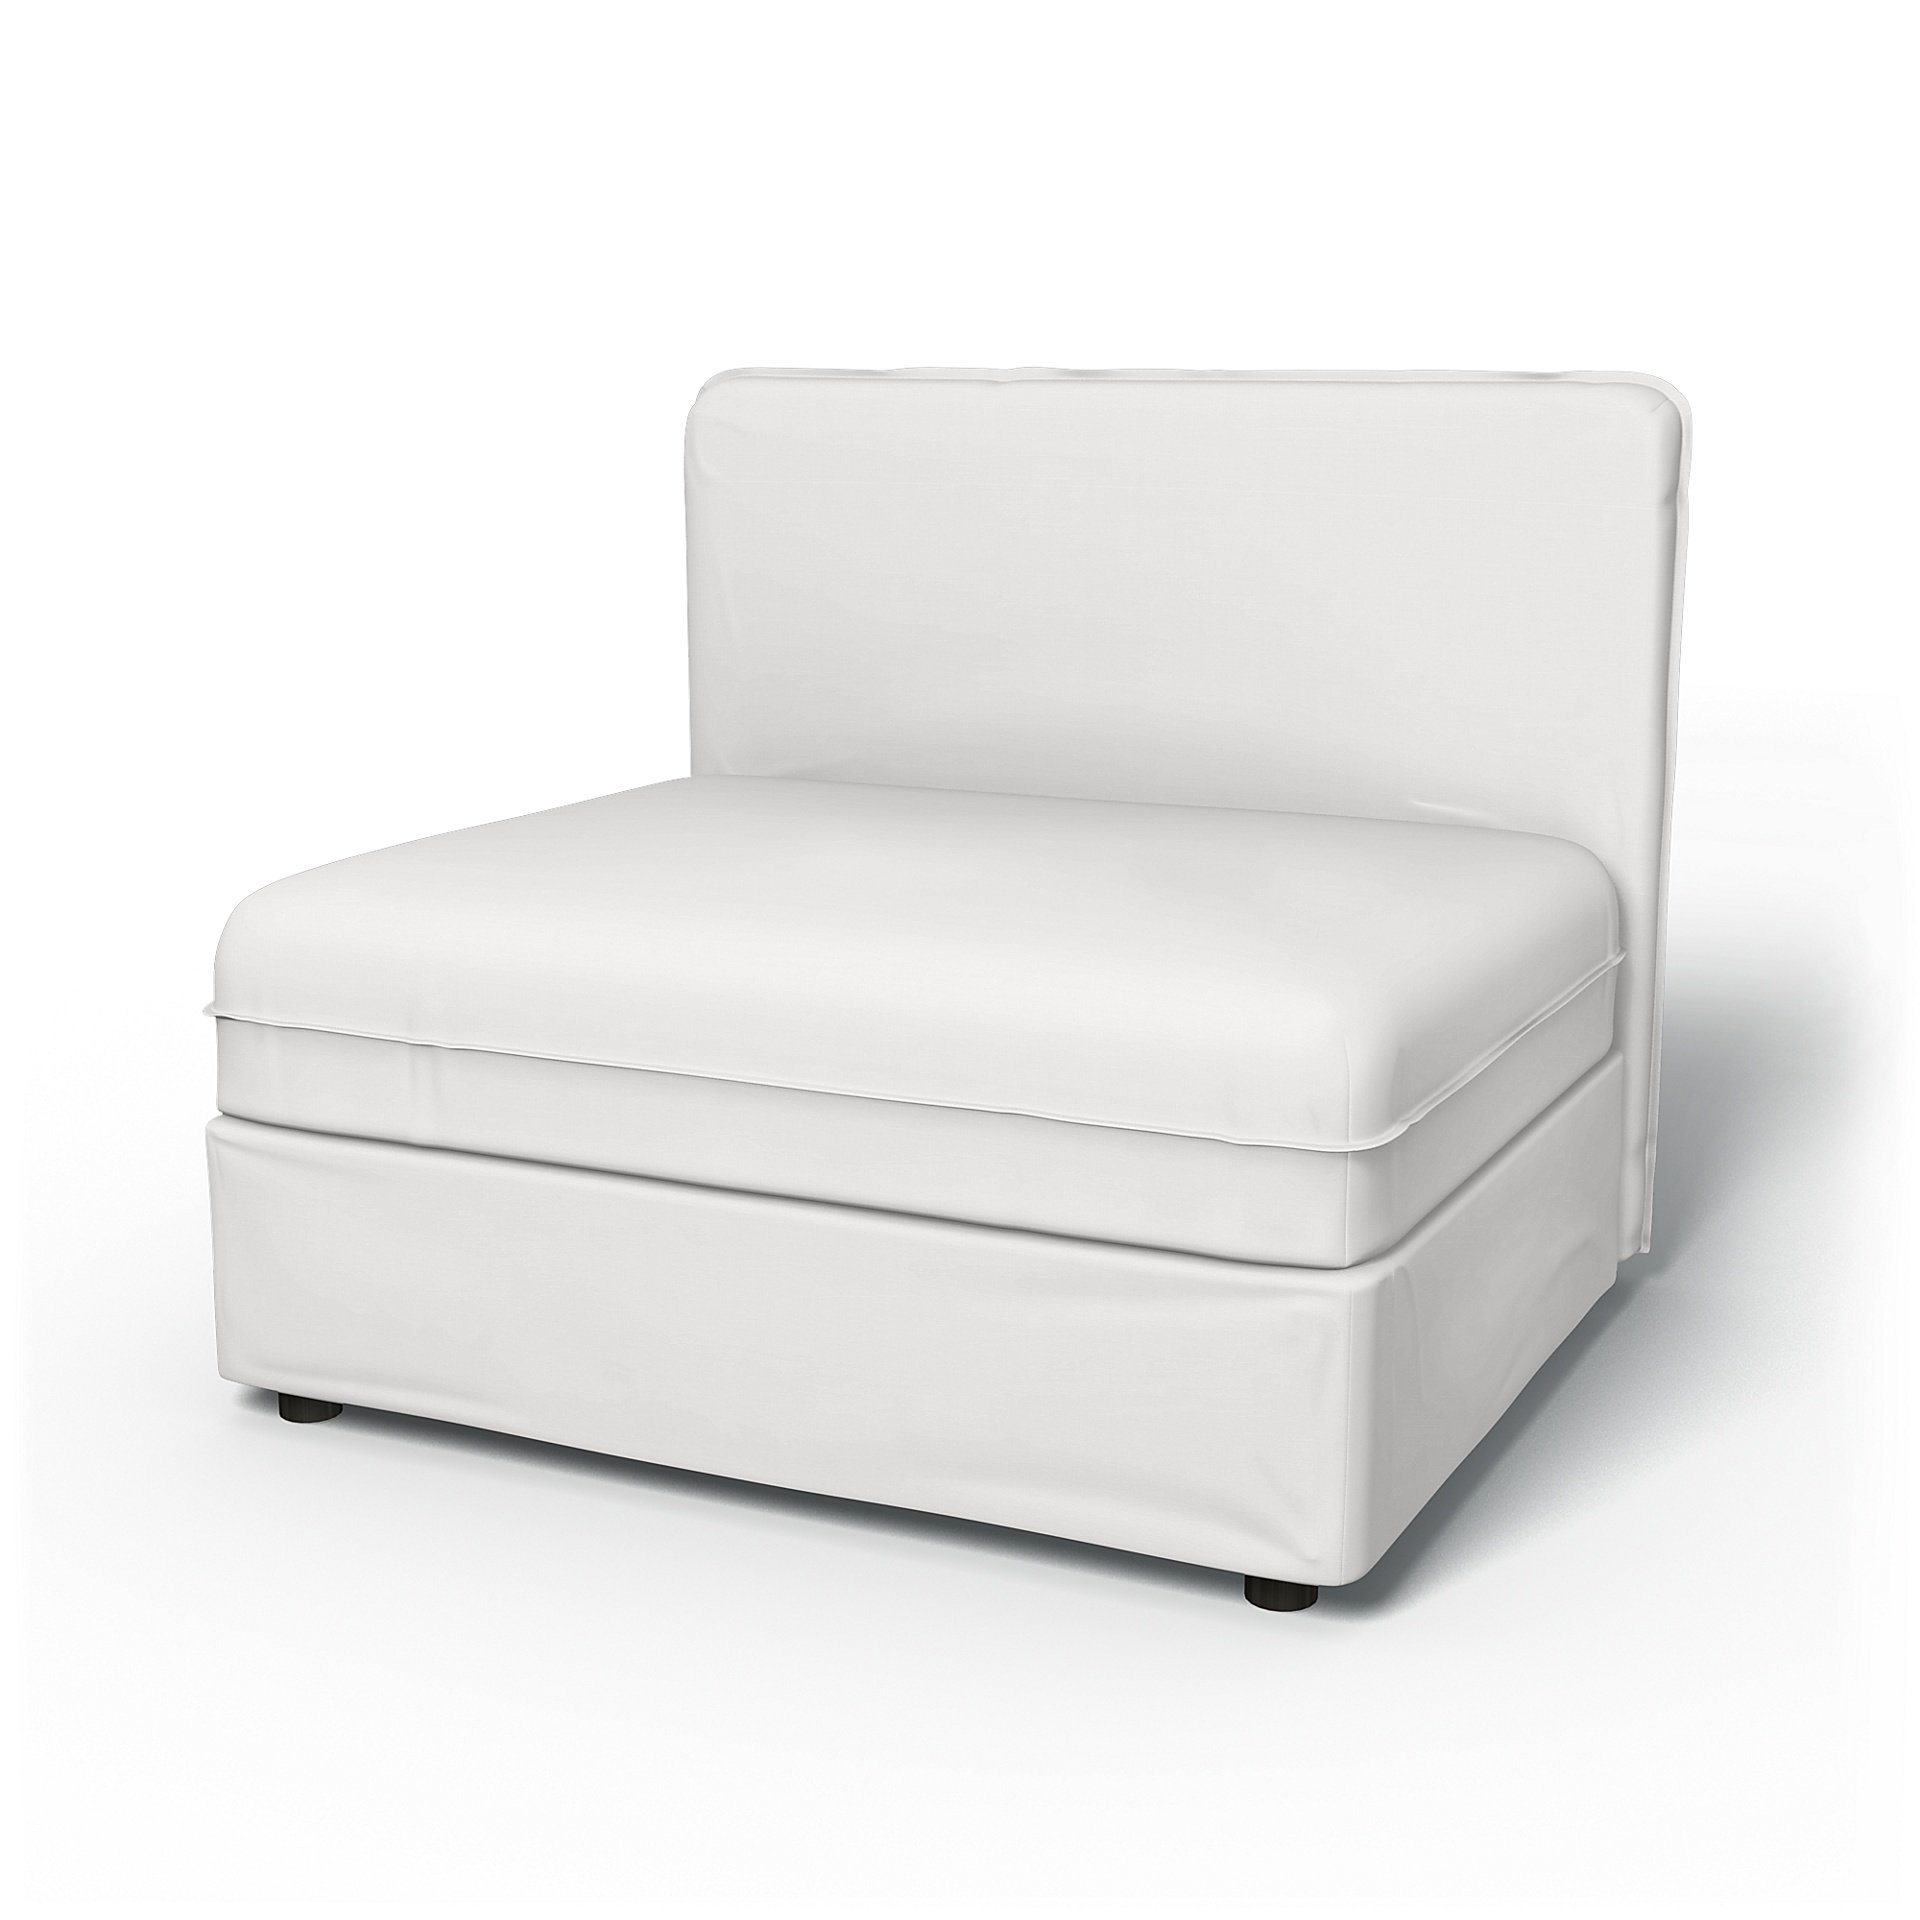 IKEA - Vallentuna Seat Module with Low Back Cover 100x80cm 39x32in, Absolute White, Cotton - Bemz